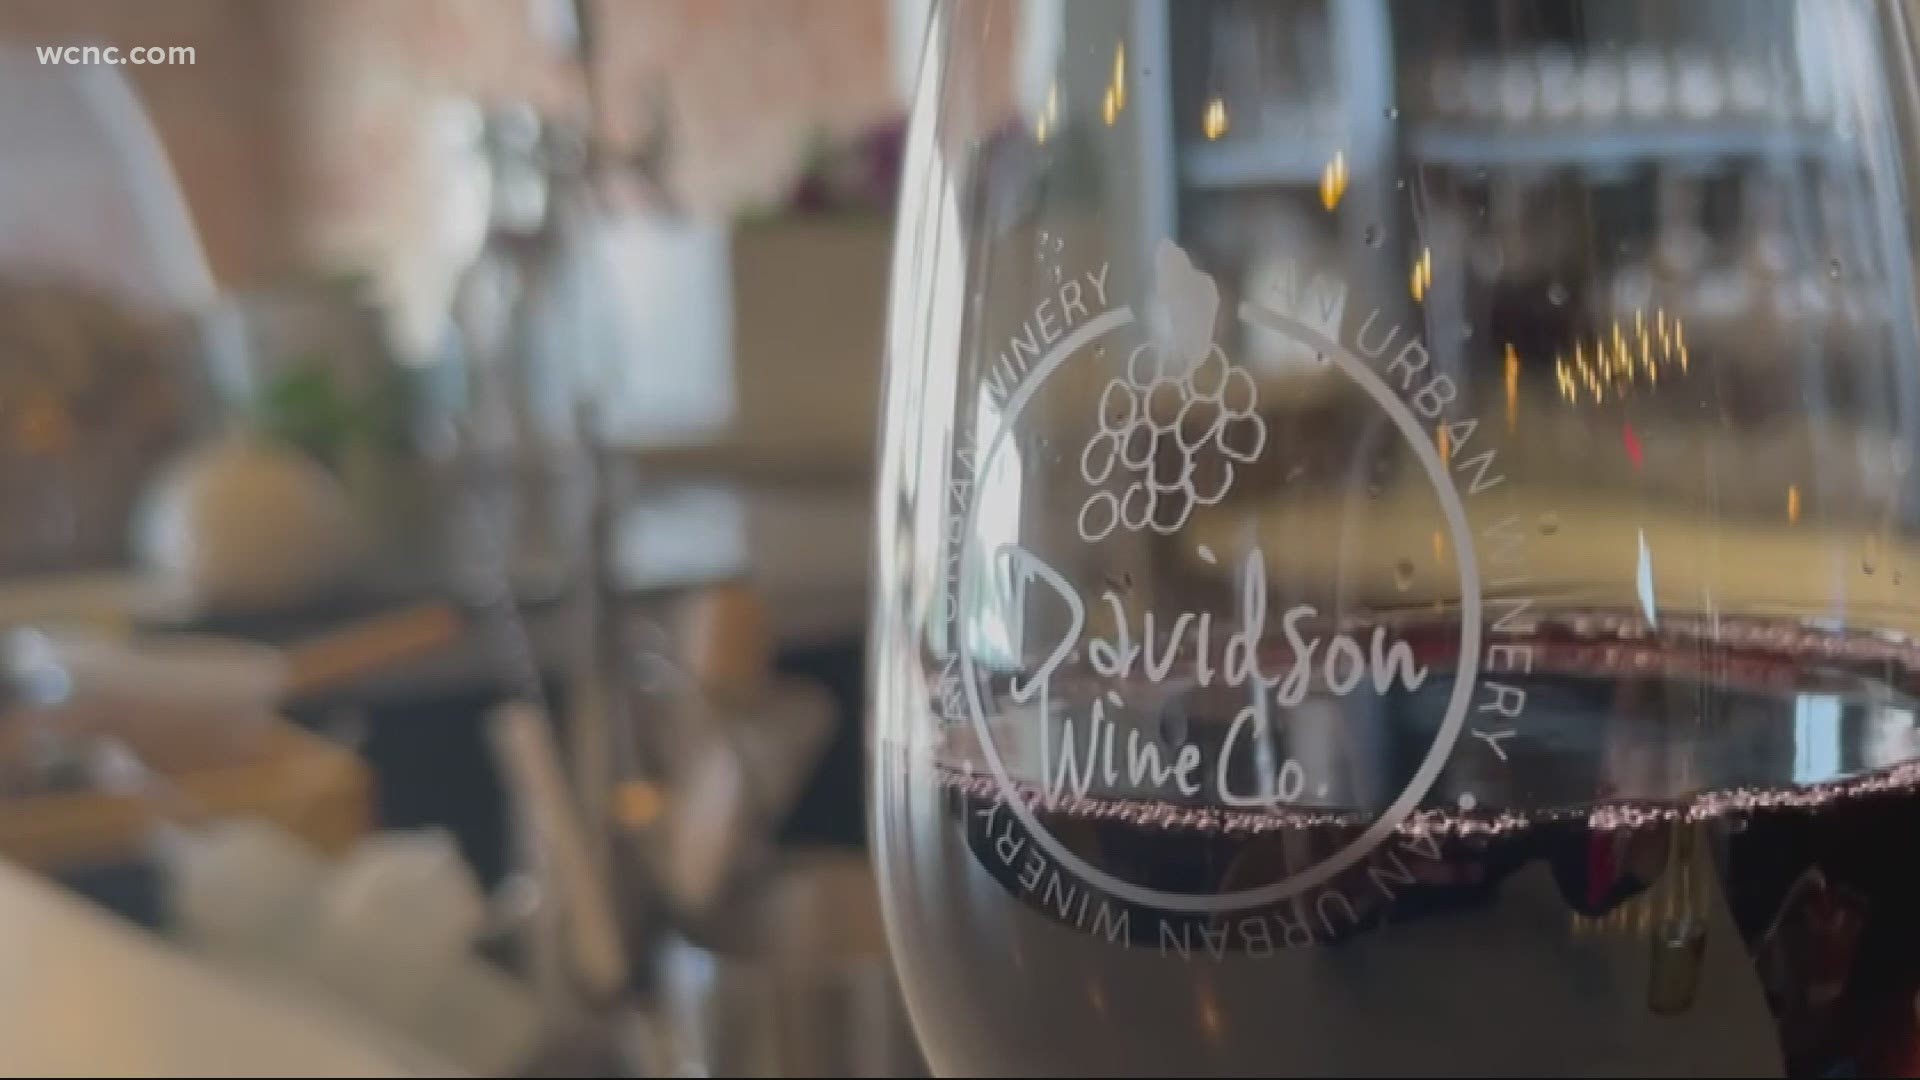 Lindsey Williams gave up her career as an attorney to open Davidson Wine Co. in 2018. Along the way she's encountered many obstacles but is living her dream.